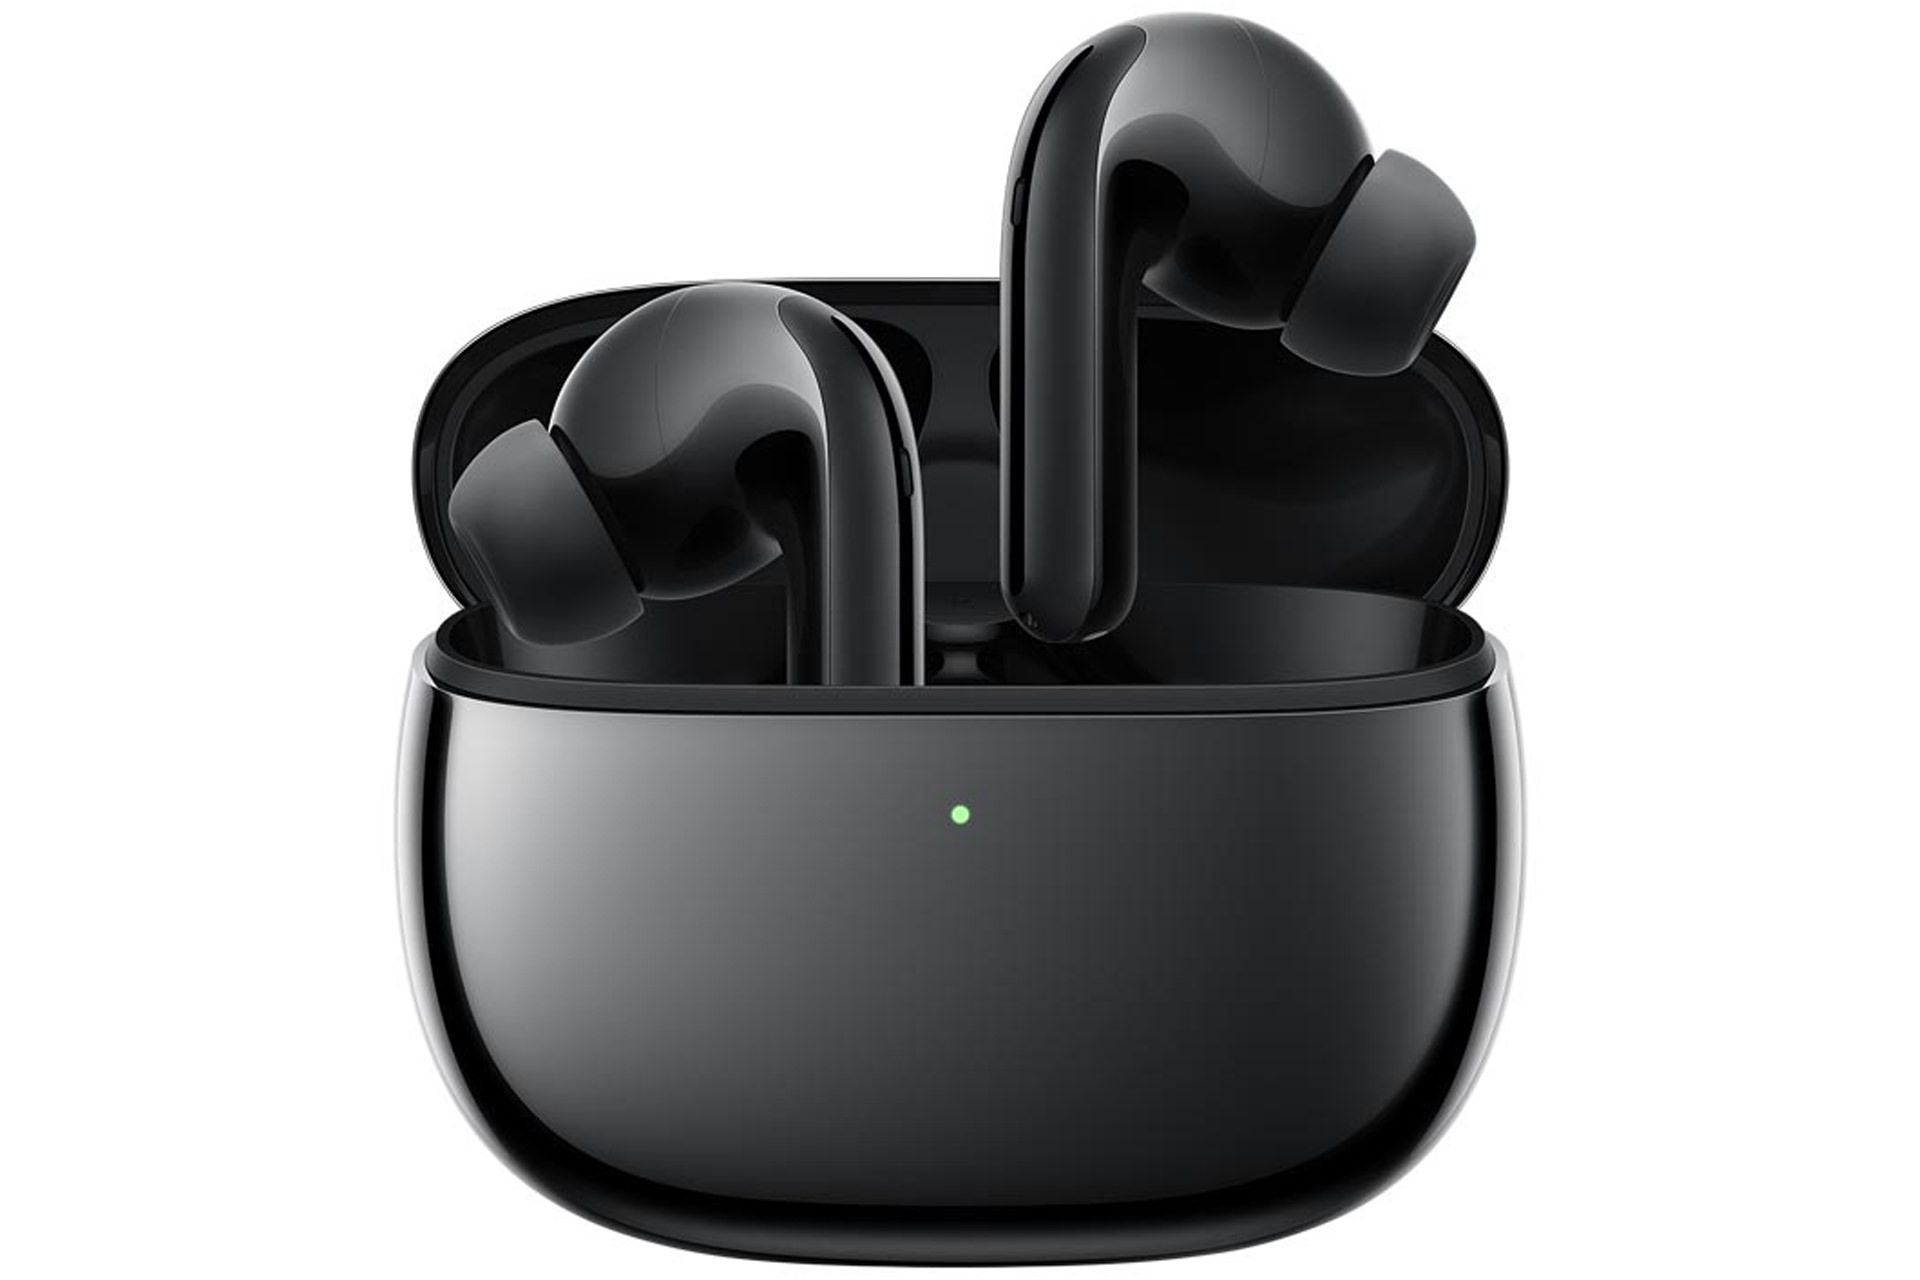 Xiaomi FlipBuds Pro headphones from the front view with open case